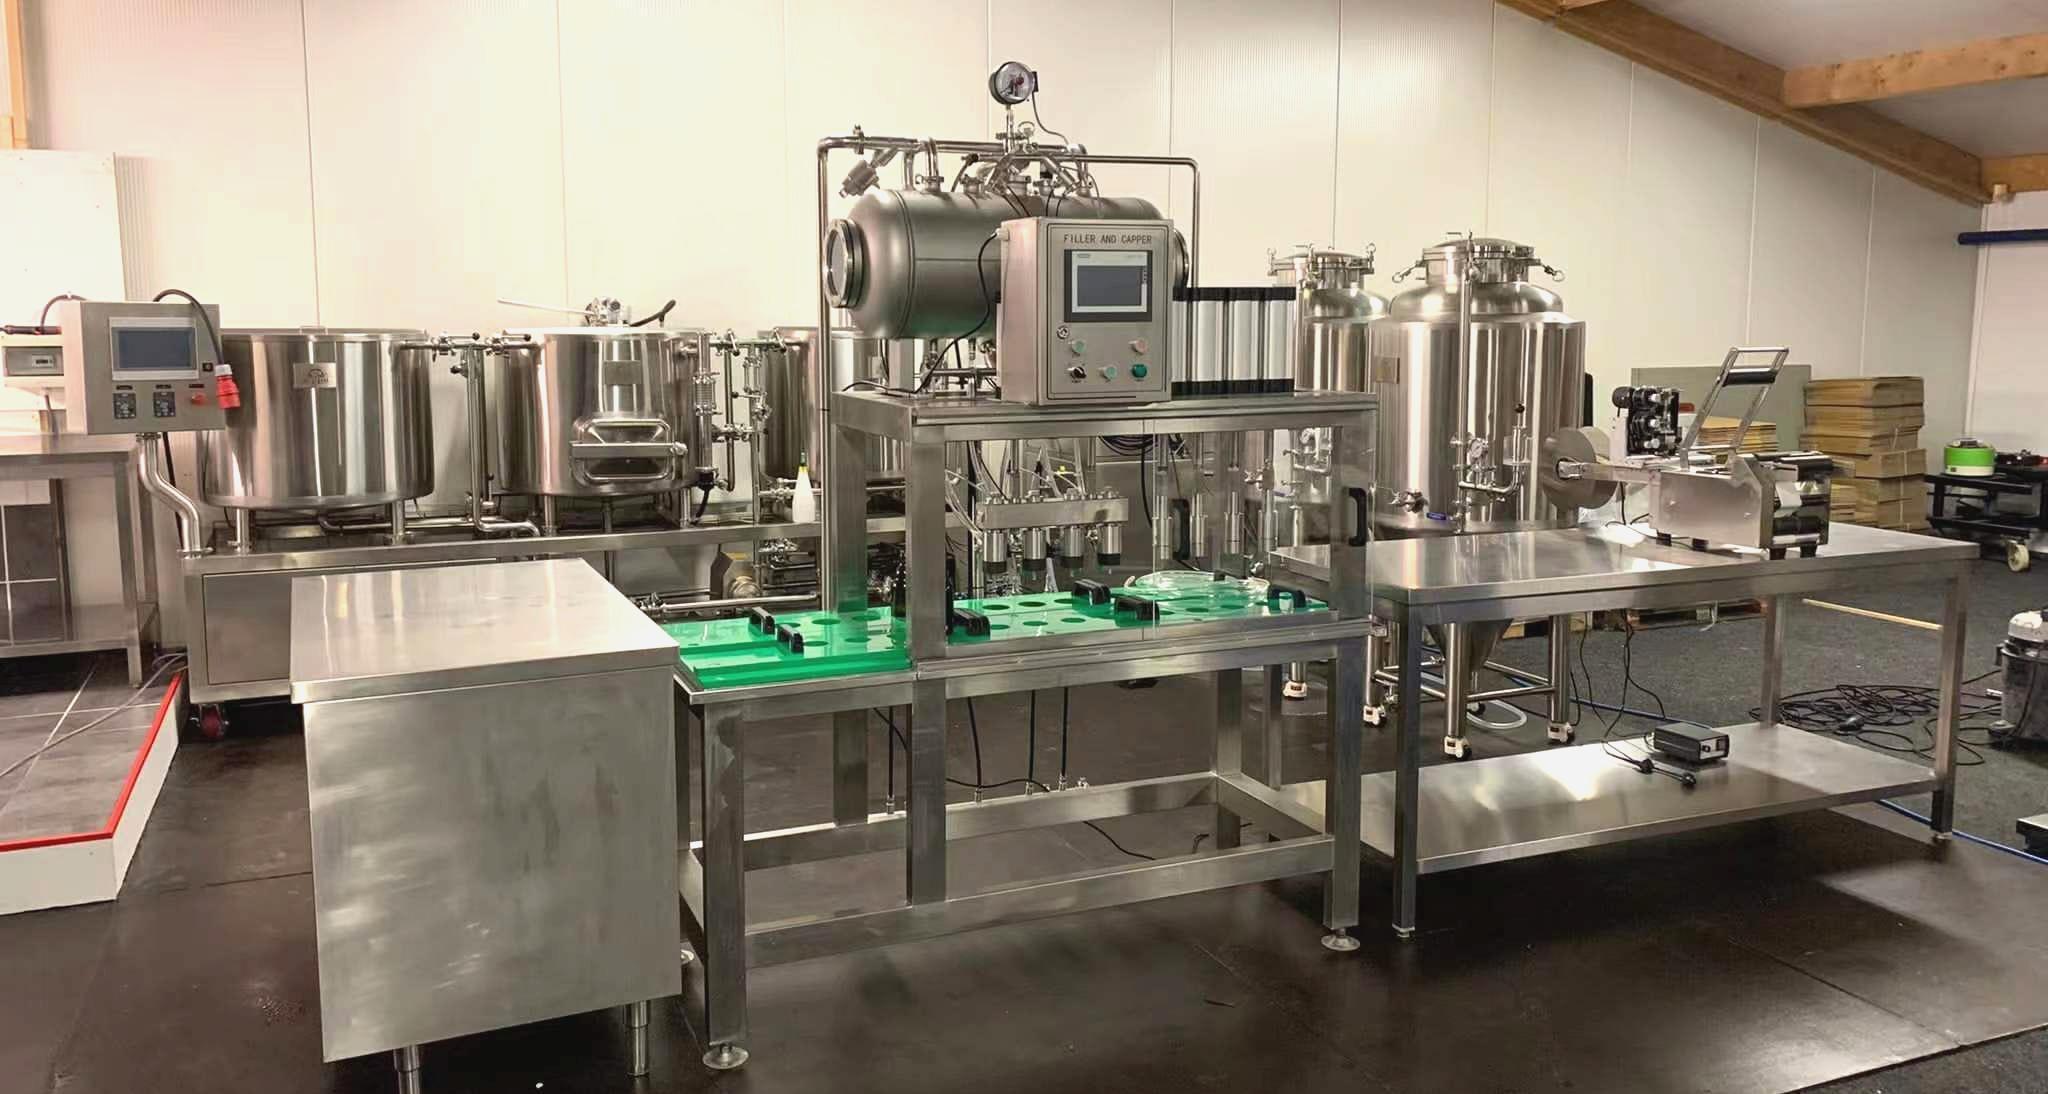 carry brewtech 200LINE Nano brewhouse with PLC system onsite